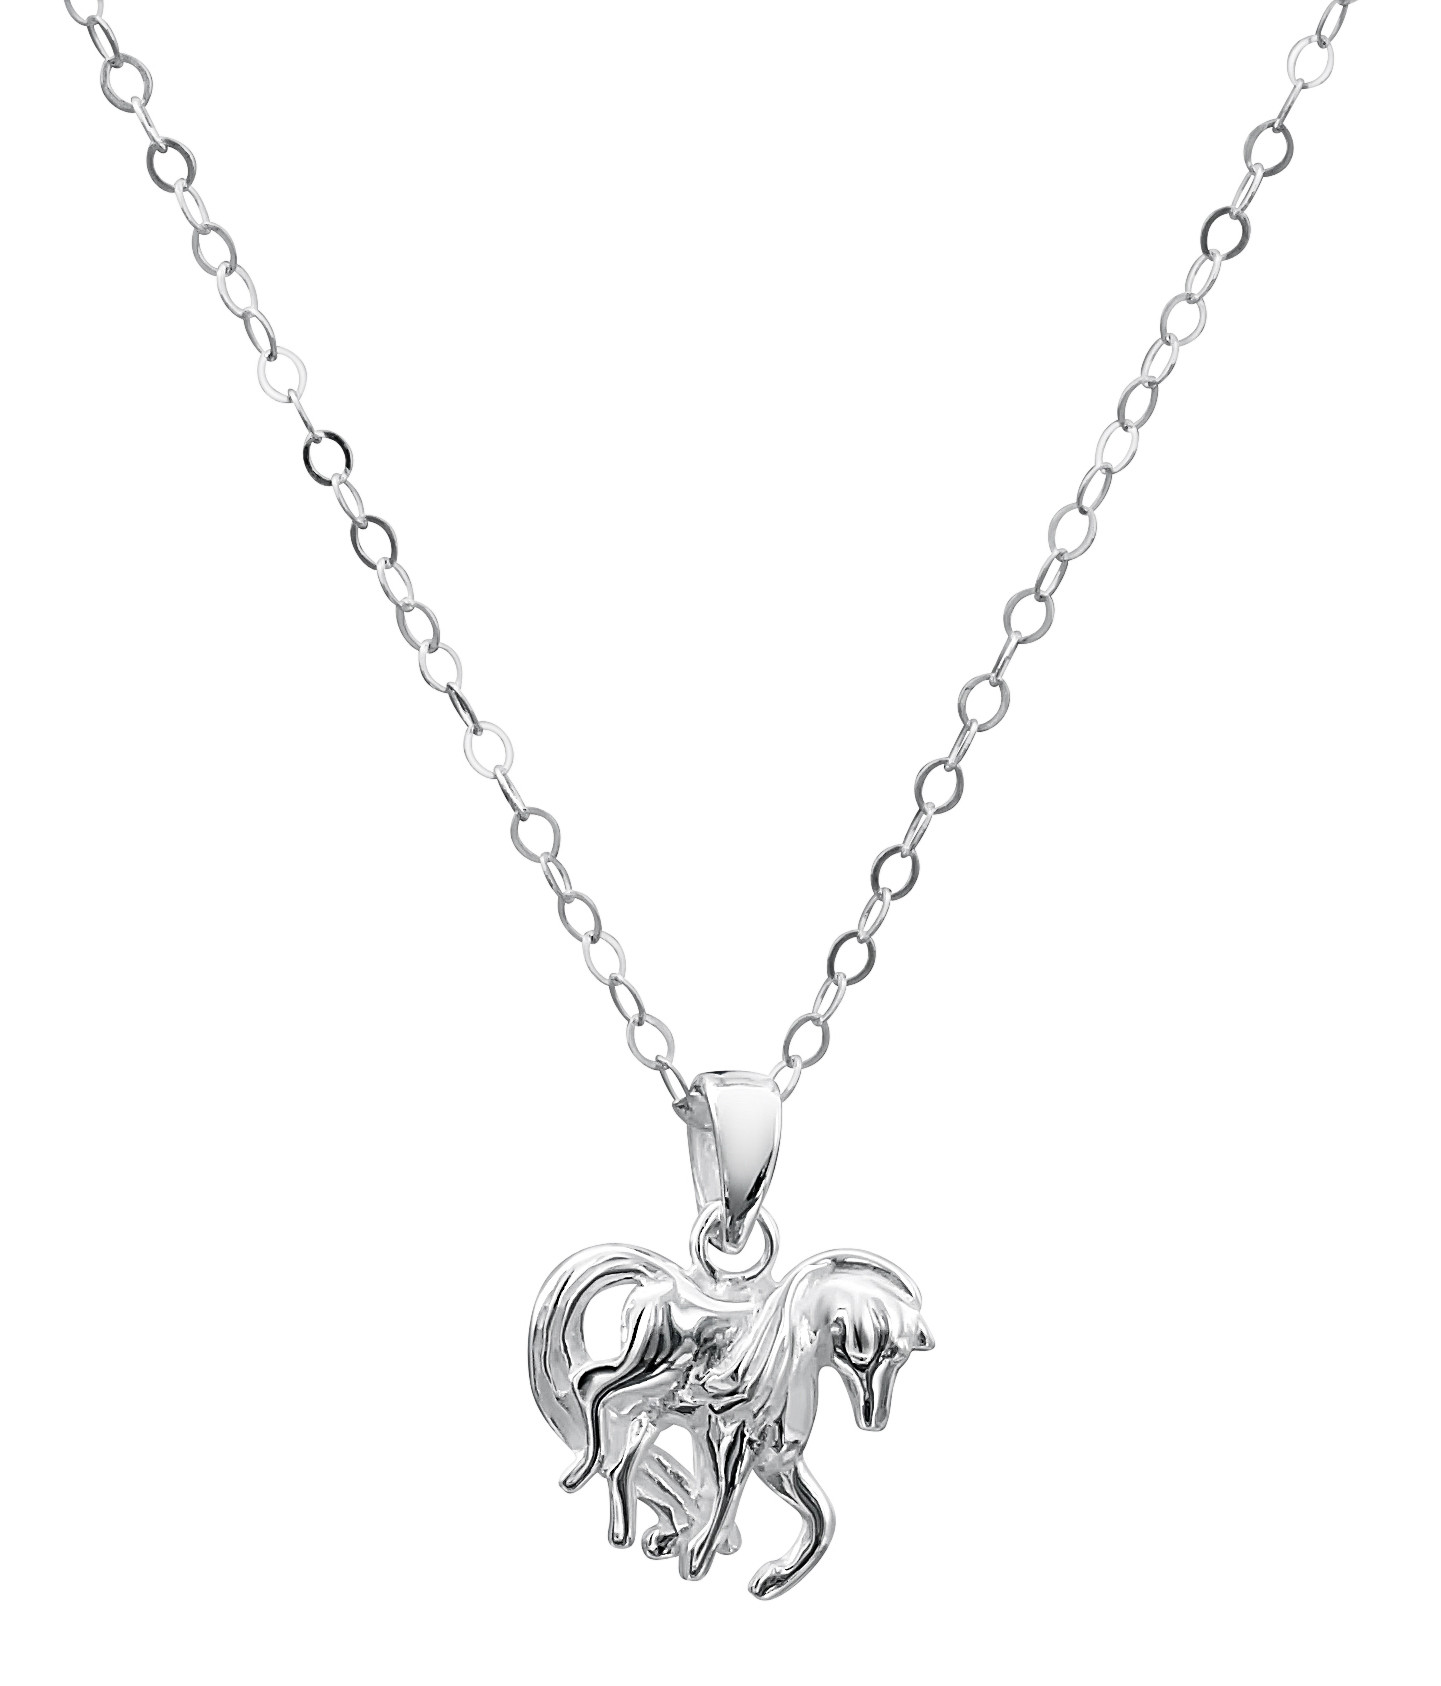 Sterling Silver Horse Necklace
 Jo For Girls Sterling Silver 35cm Horse Necklace